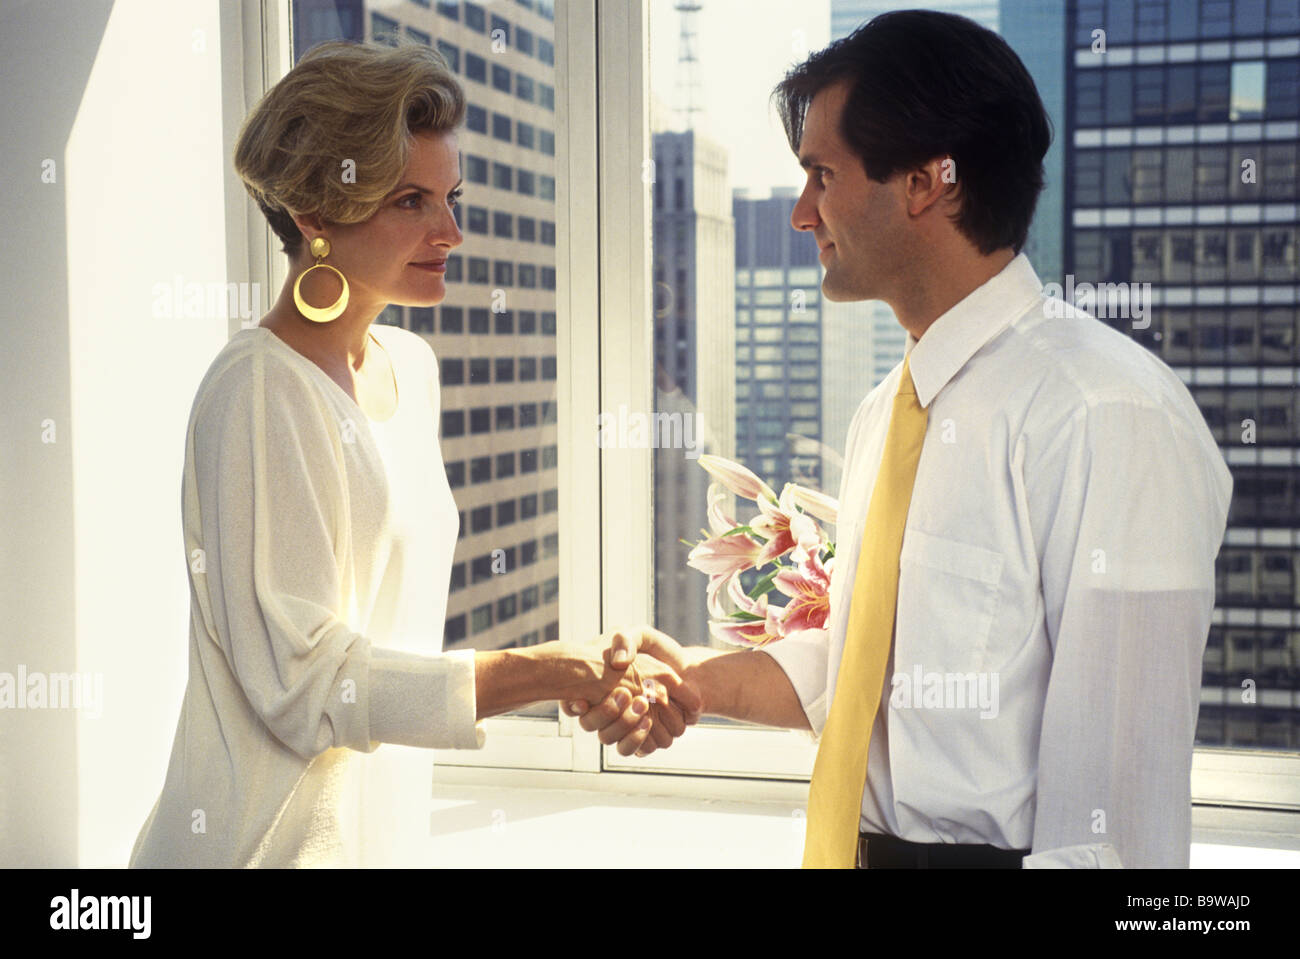 1994 HISTORICAL MAN AND WOMAN OFFICE WORKERS HANDSHAKE Stock Photo